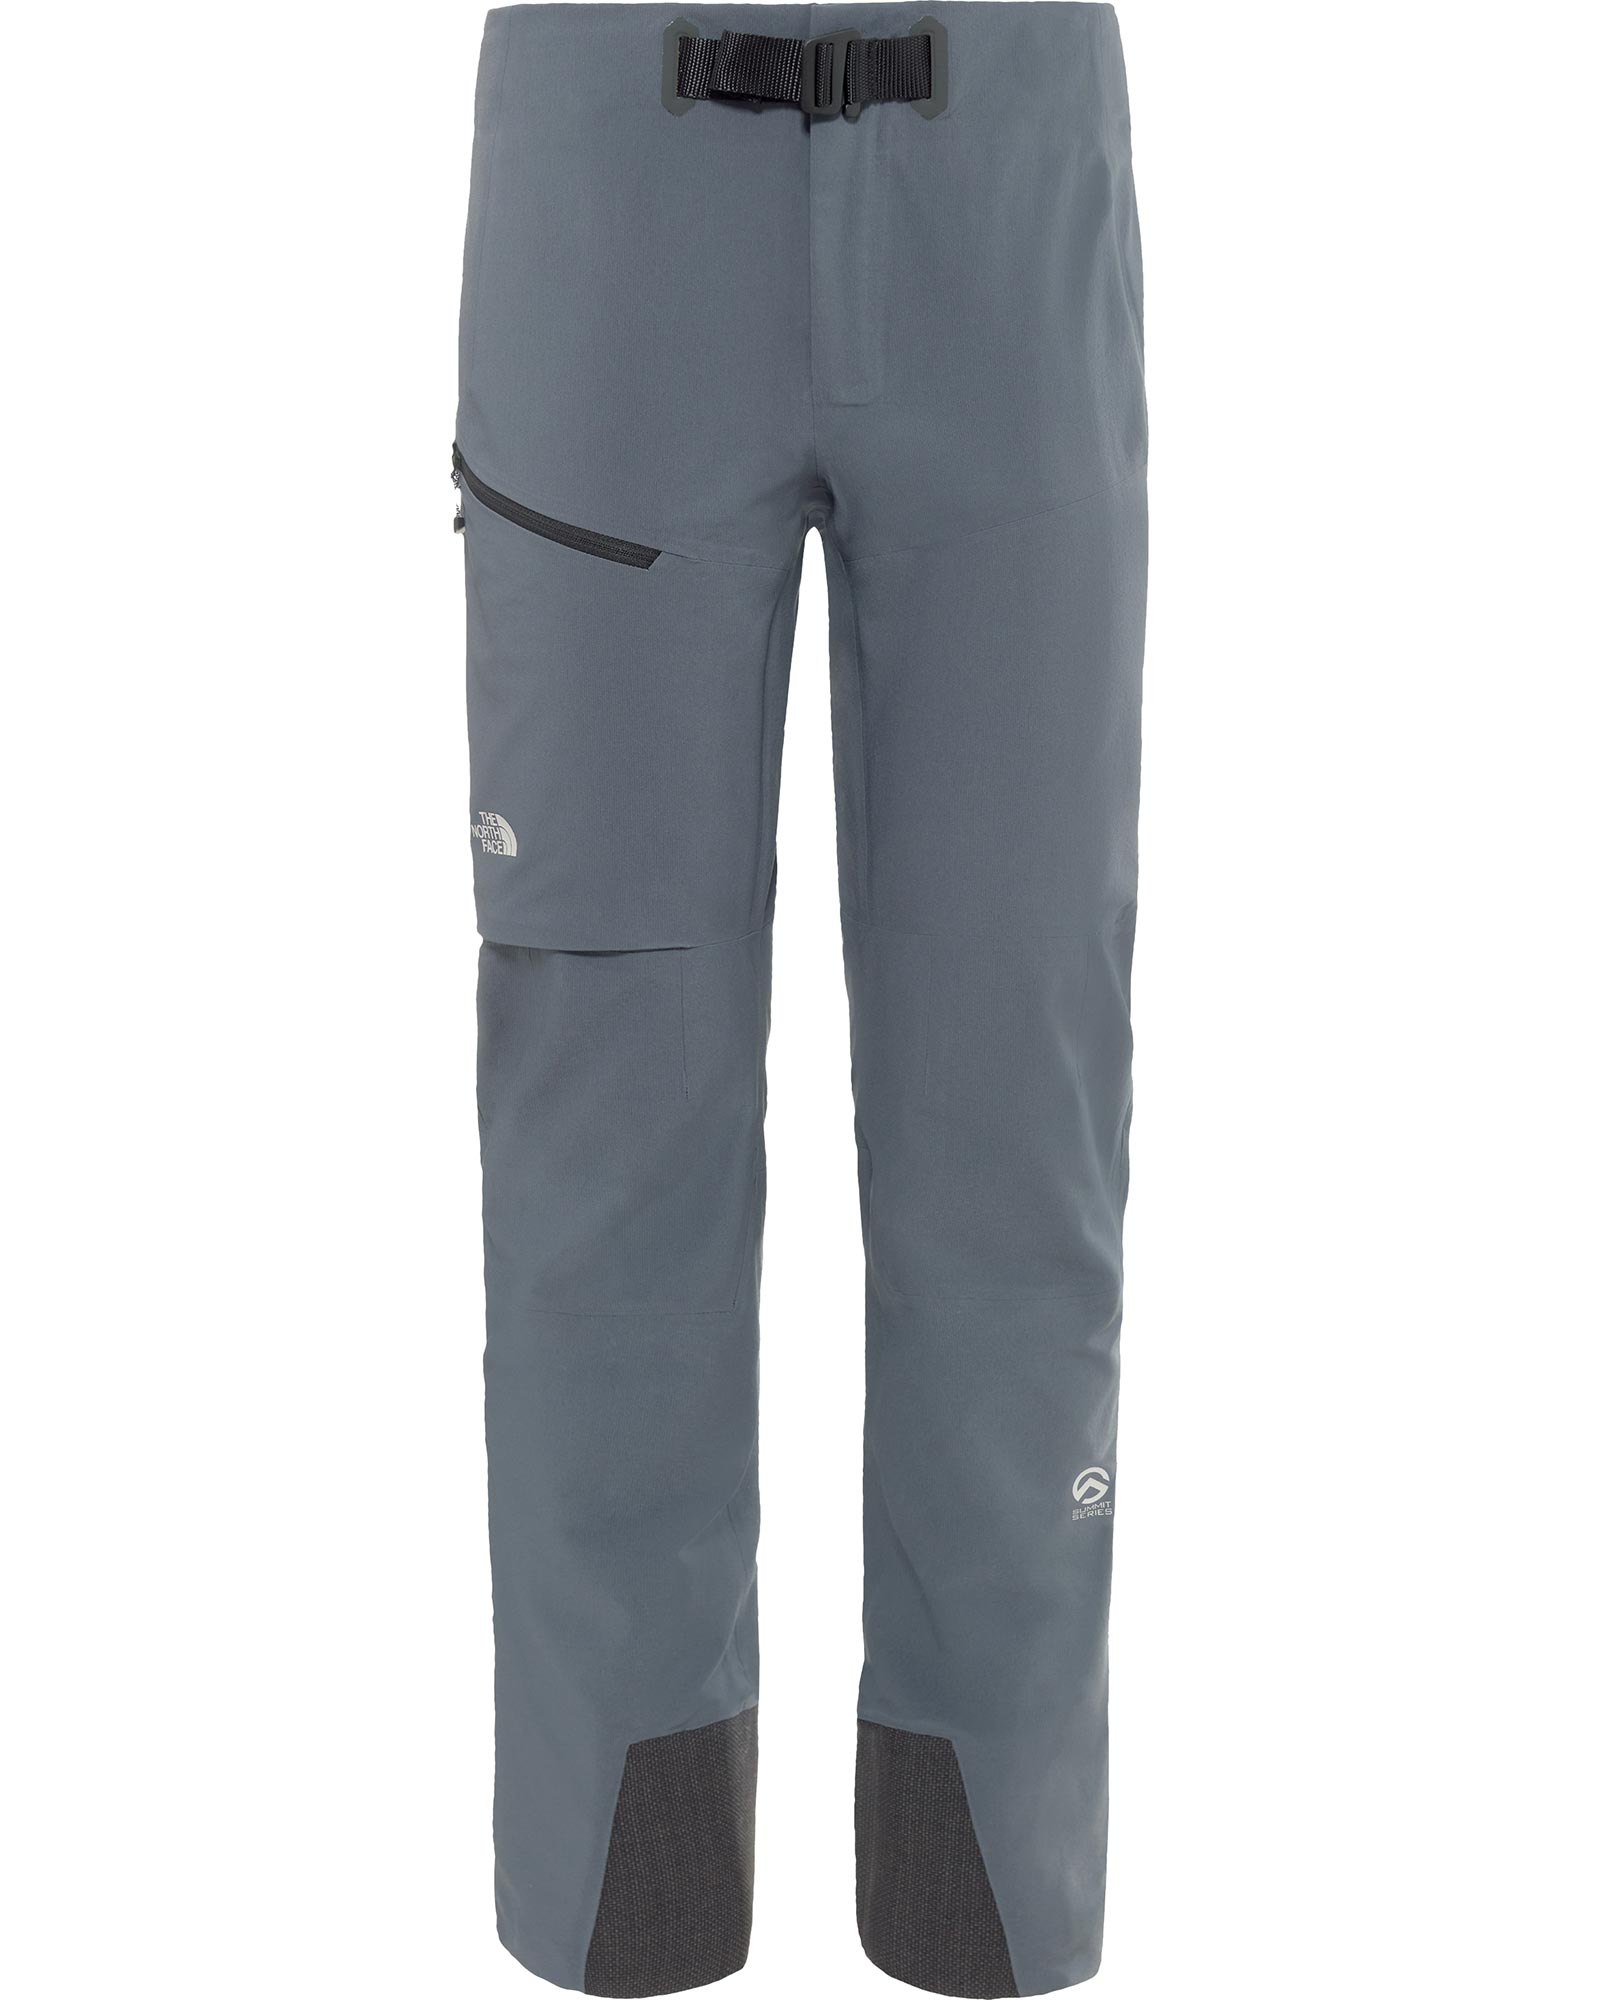 The North Face Proprius L4 Soft Shell Womens Pants